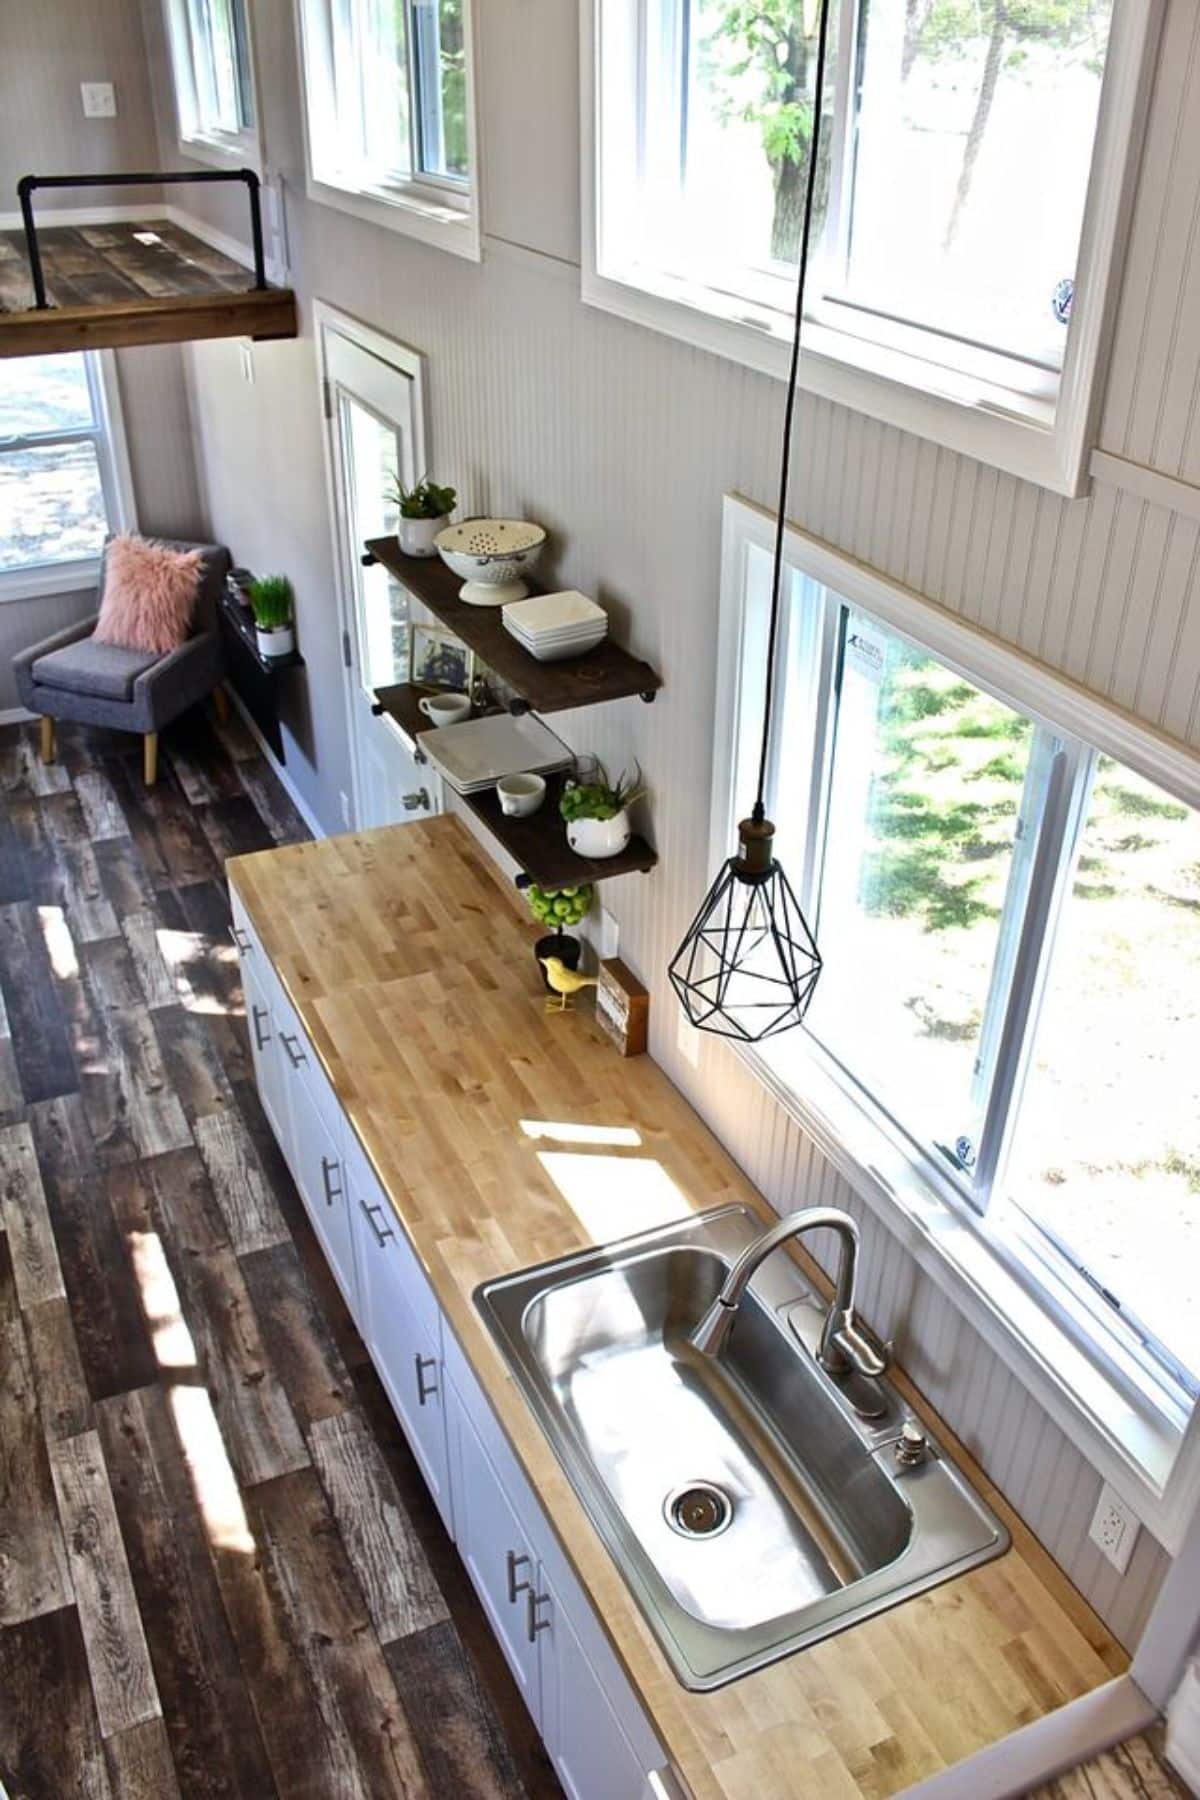 Kitchen area of NOAH certified tiny home